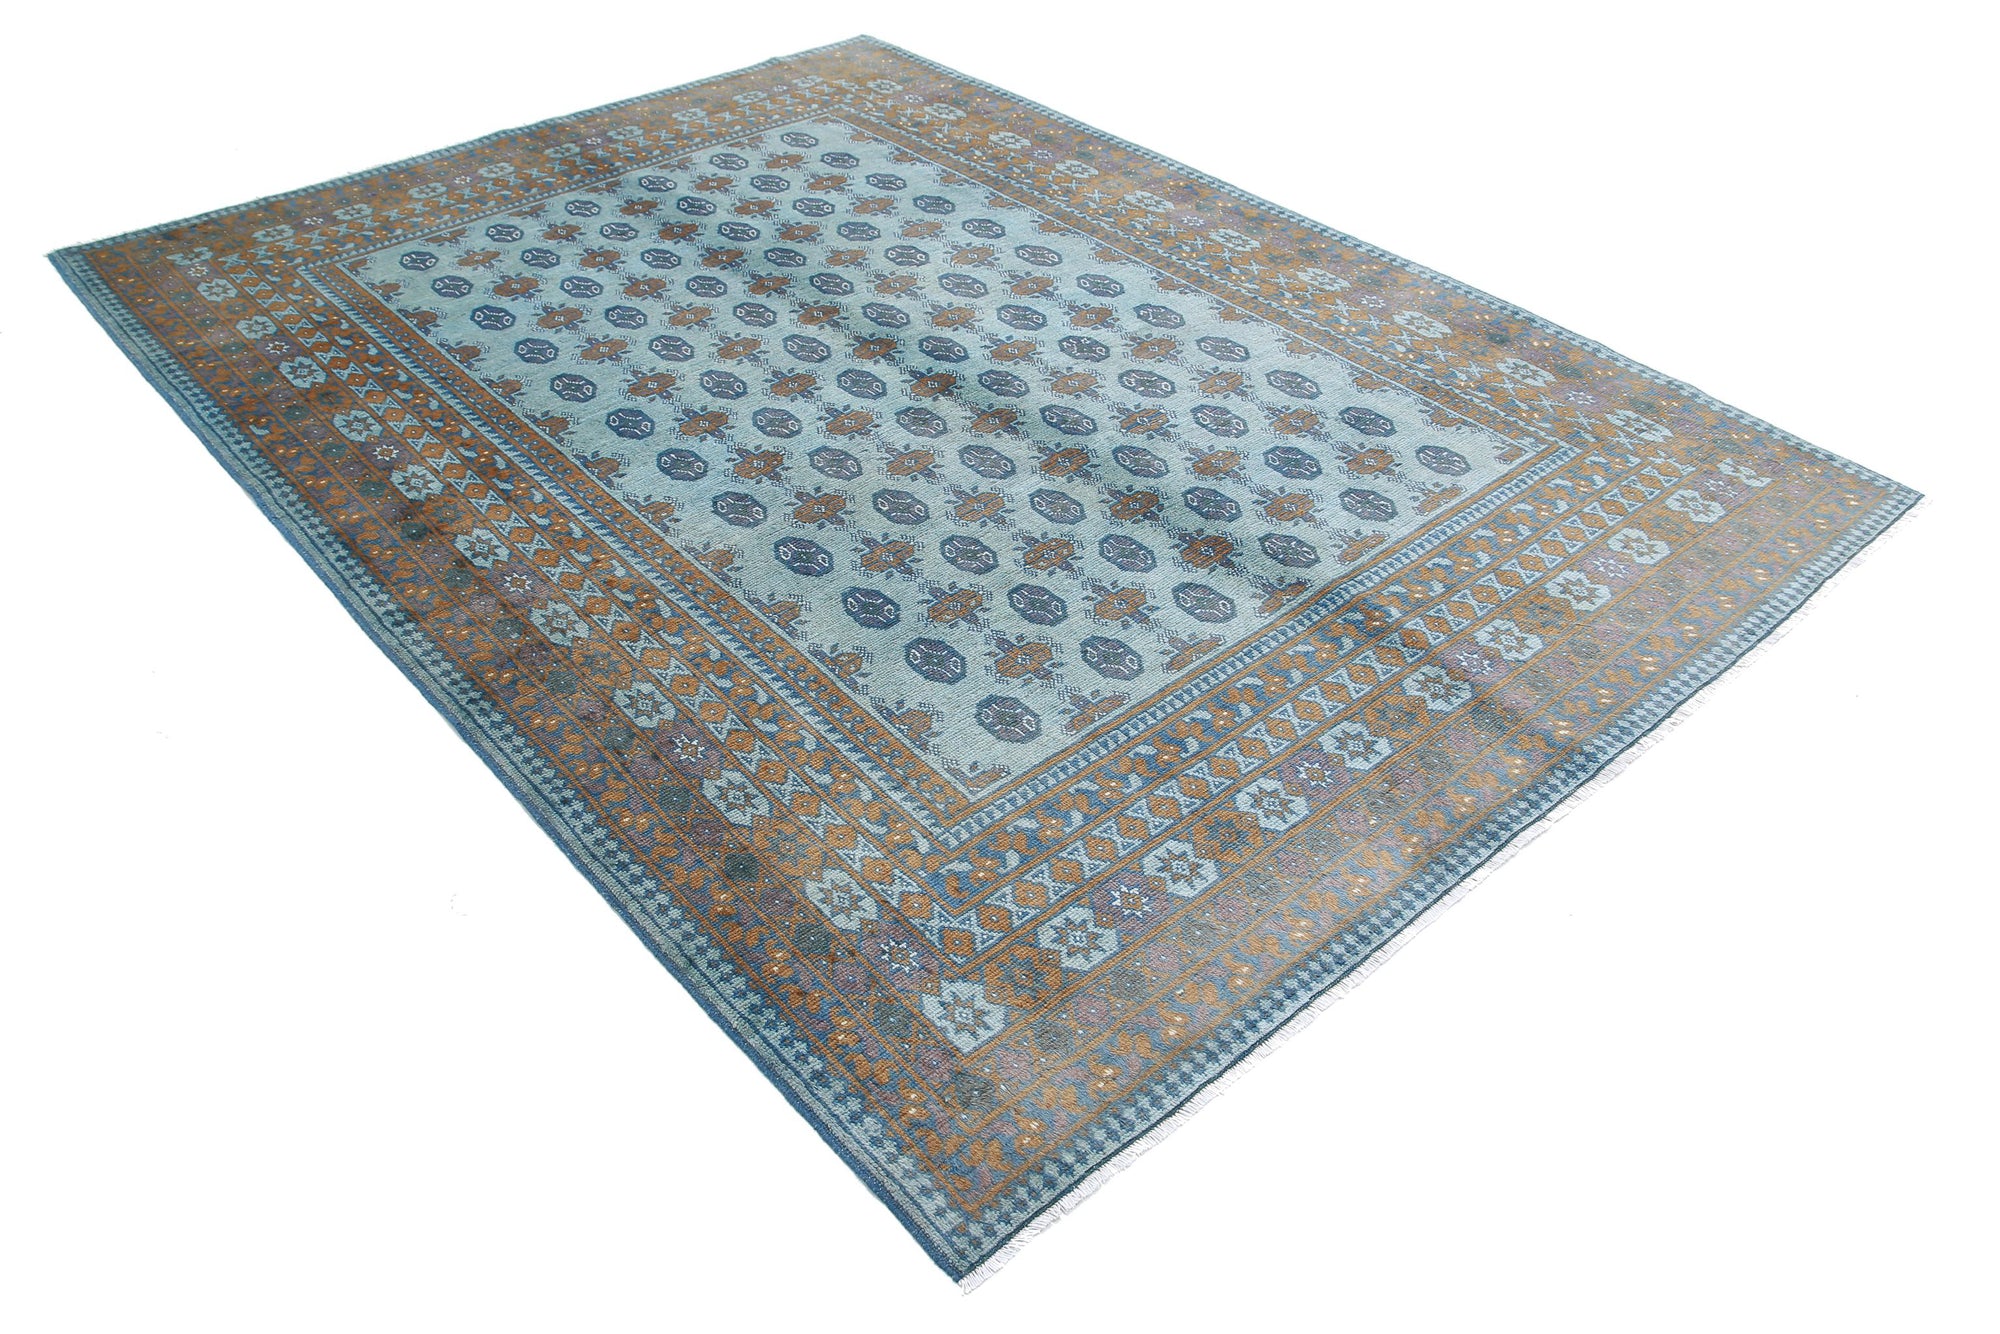 Revival-hand-knotted-gul-collection-wool-rug-5013969-1.jpg